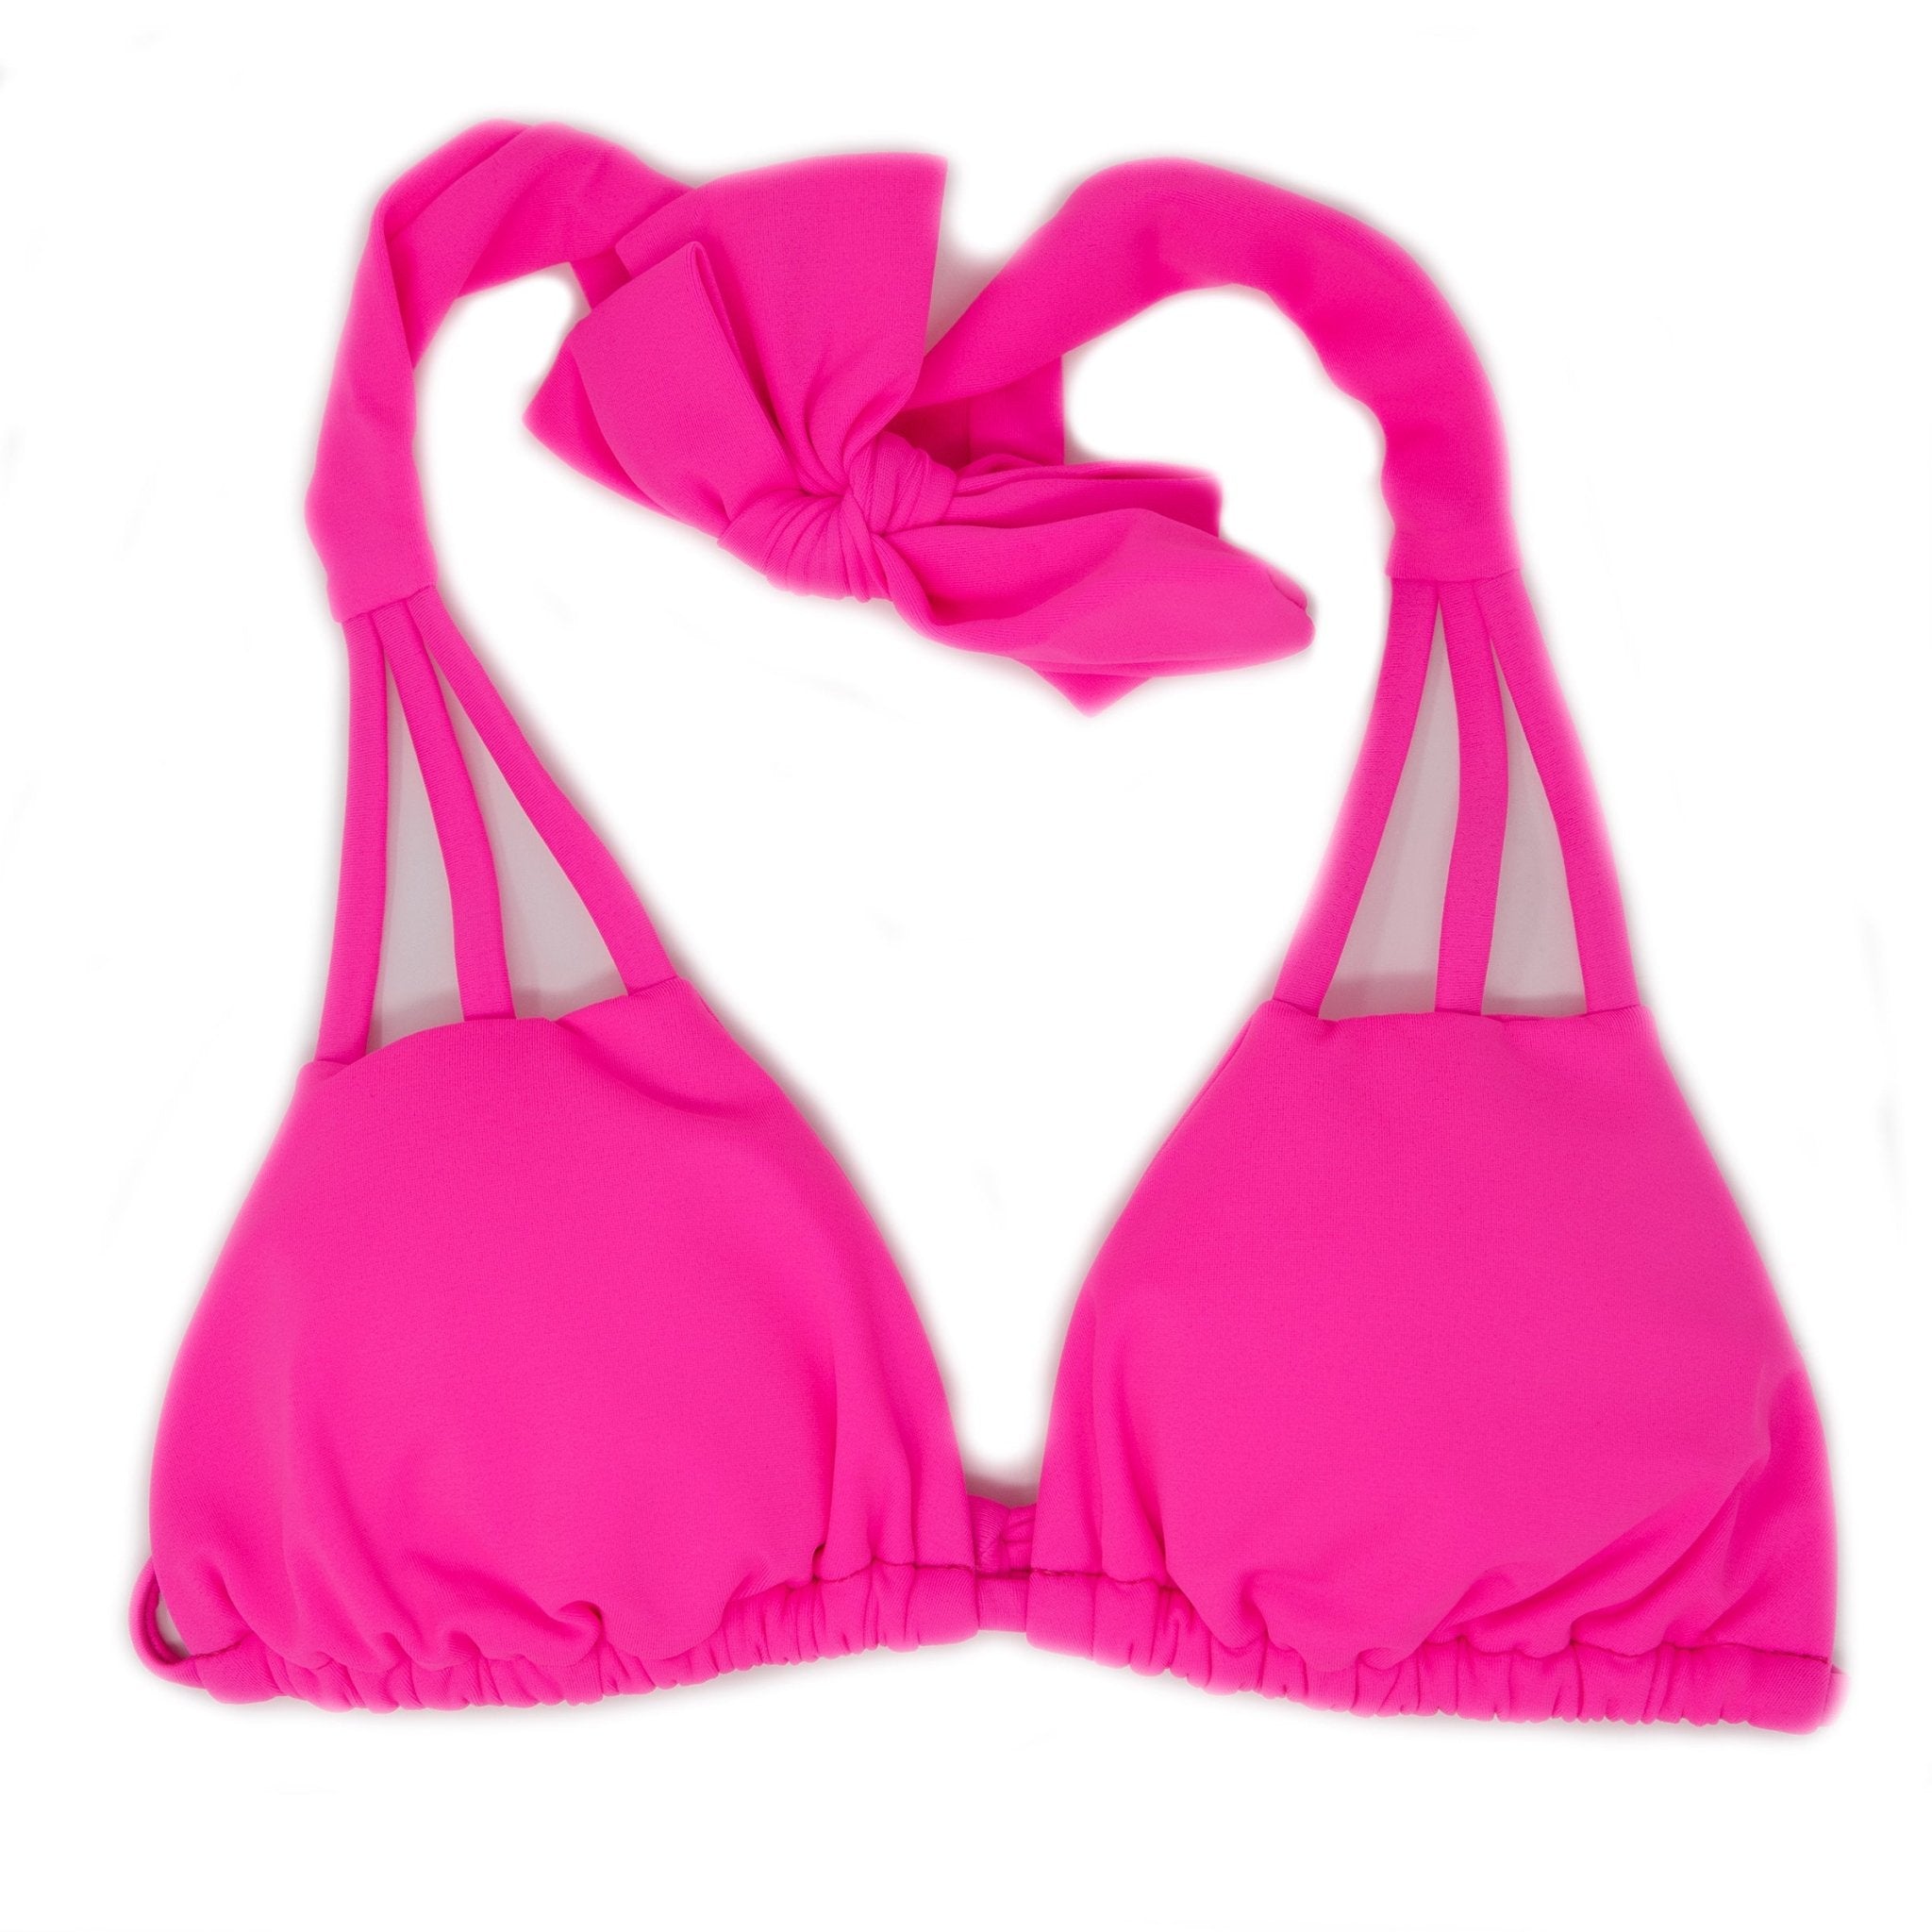 Seaweeds Famous Pink Strappy Top - Destination PSP